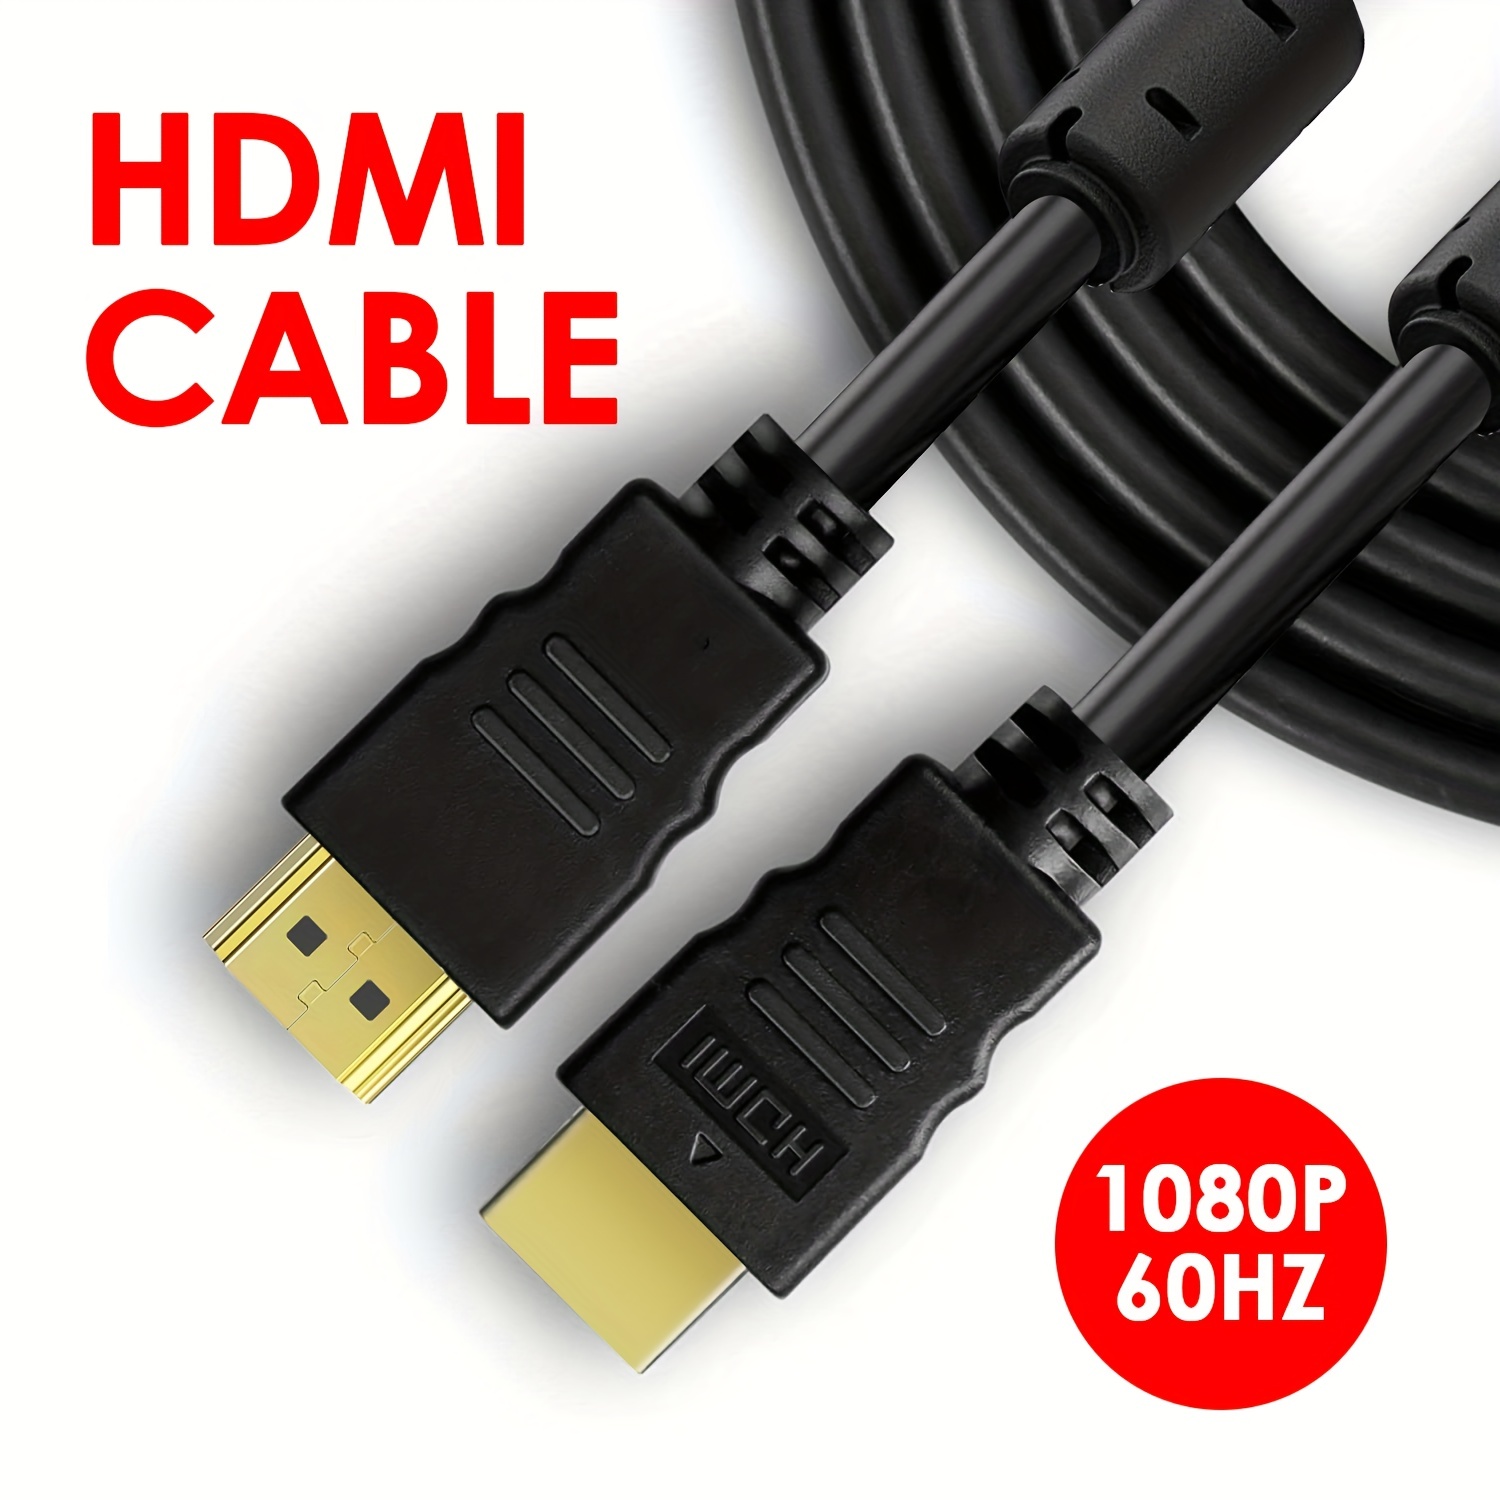 Highest End 4K HDMI Cable 6ft [4K@60Hz, 2K@240Hz] Alloy Connector & Braided  - High Speed 18Gbps HDMI 2.0 Cable - HDR, 